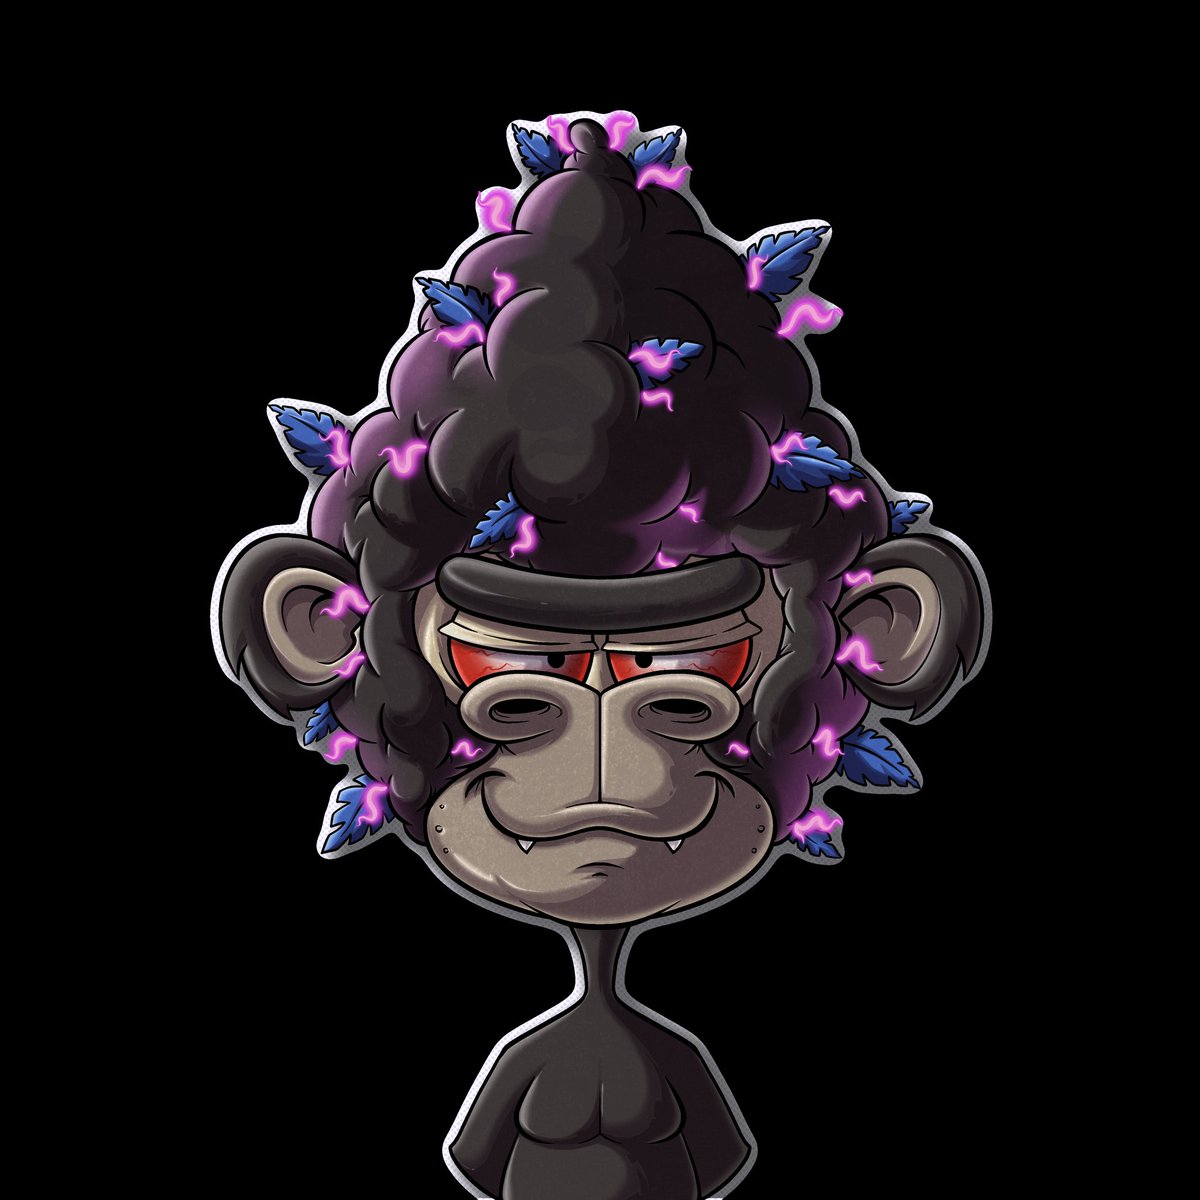 🎁GIVEAWAY TIME🎁 For your chance to win this @SkunkyChunks Base SkunkMonkey NFT simply ⬇️⬇️⬇️ Follow @skunkychunks RT, Like + tag 3 friends Comment @WAX_io address bellow⬇️ 1 winner will be picked in 48 hours🥳🎁 #WAXFAM #WAXP #Giveaway #NFTgiveaway